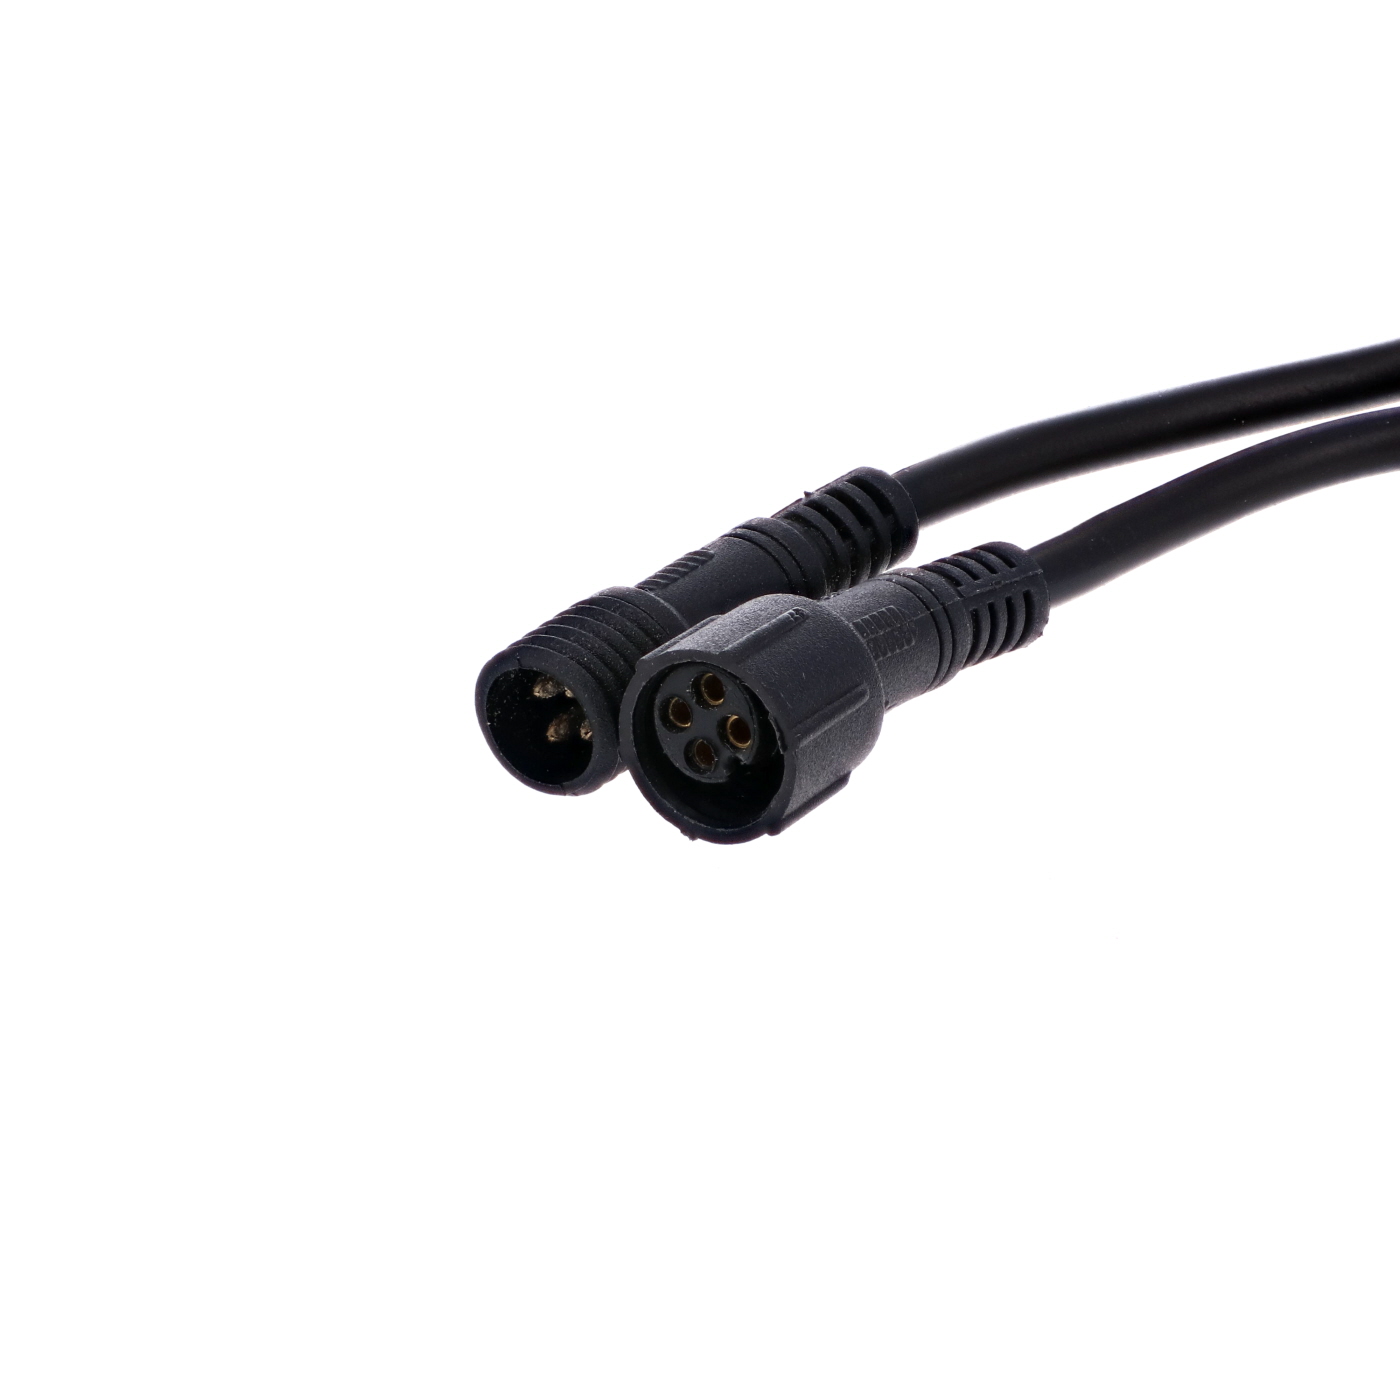 LED cable DIN connection 2 cables